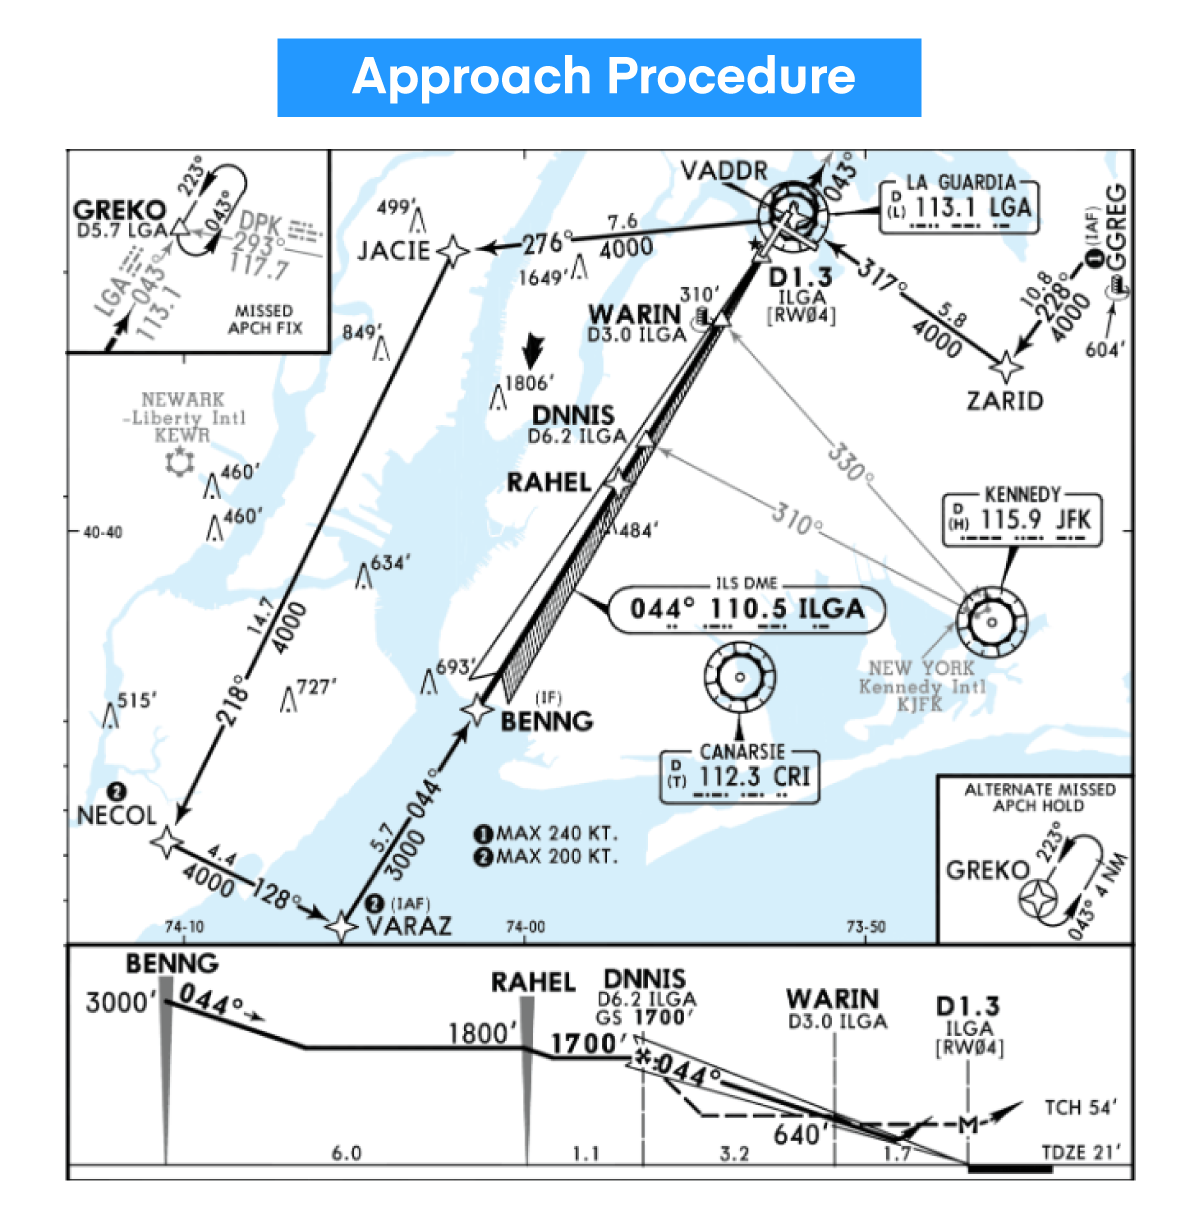 Jeppesen chart approach procedure, plan and profile view.